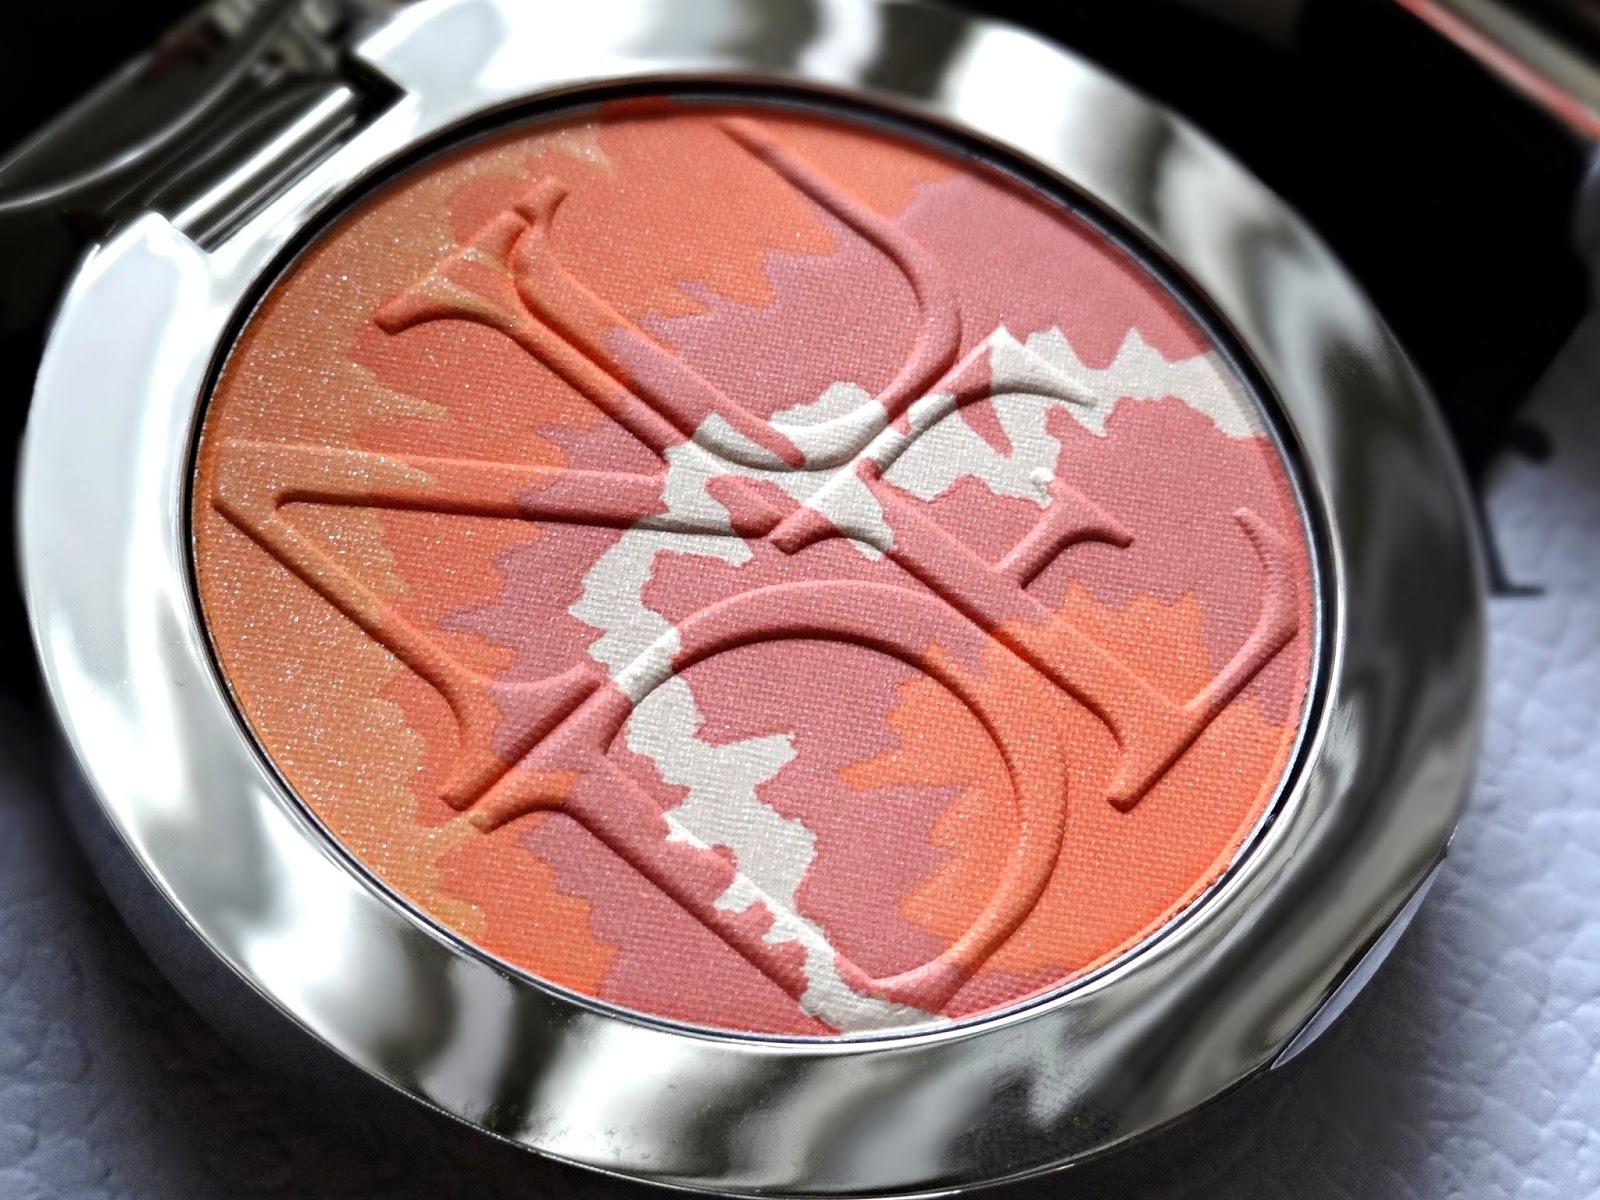 DIOR Diorskin Nude TanTie Dye Edition Blush Harmony in Coral Sunset Review, Photos & Swatches